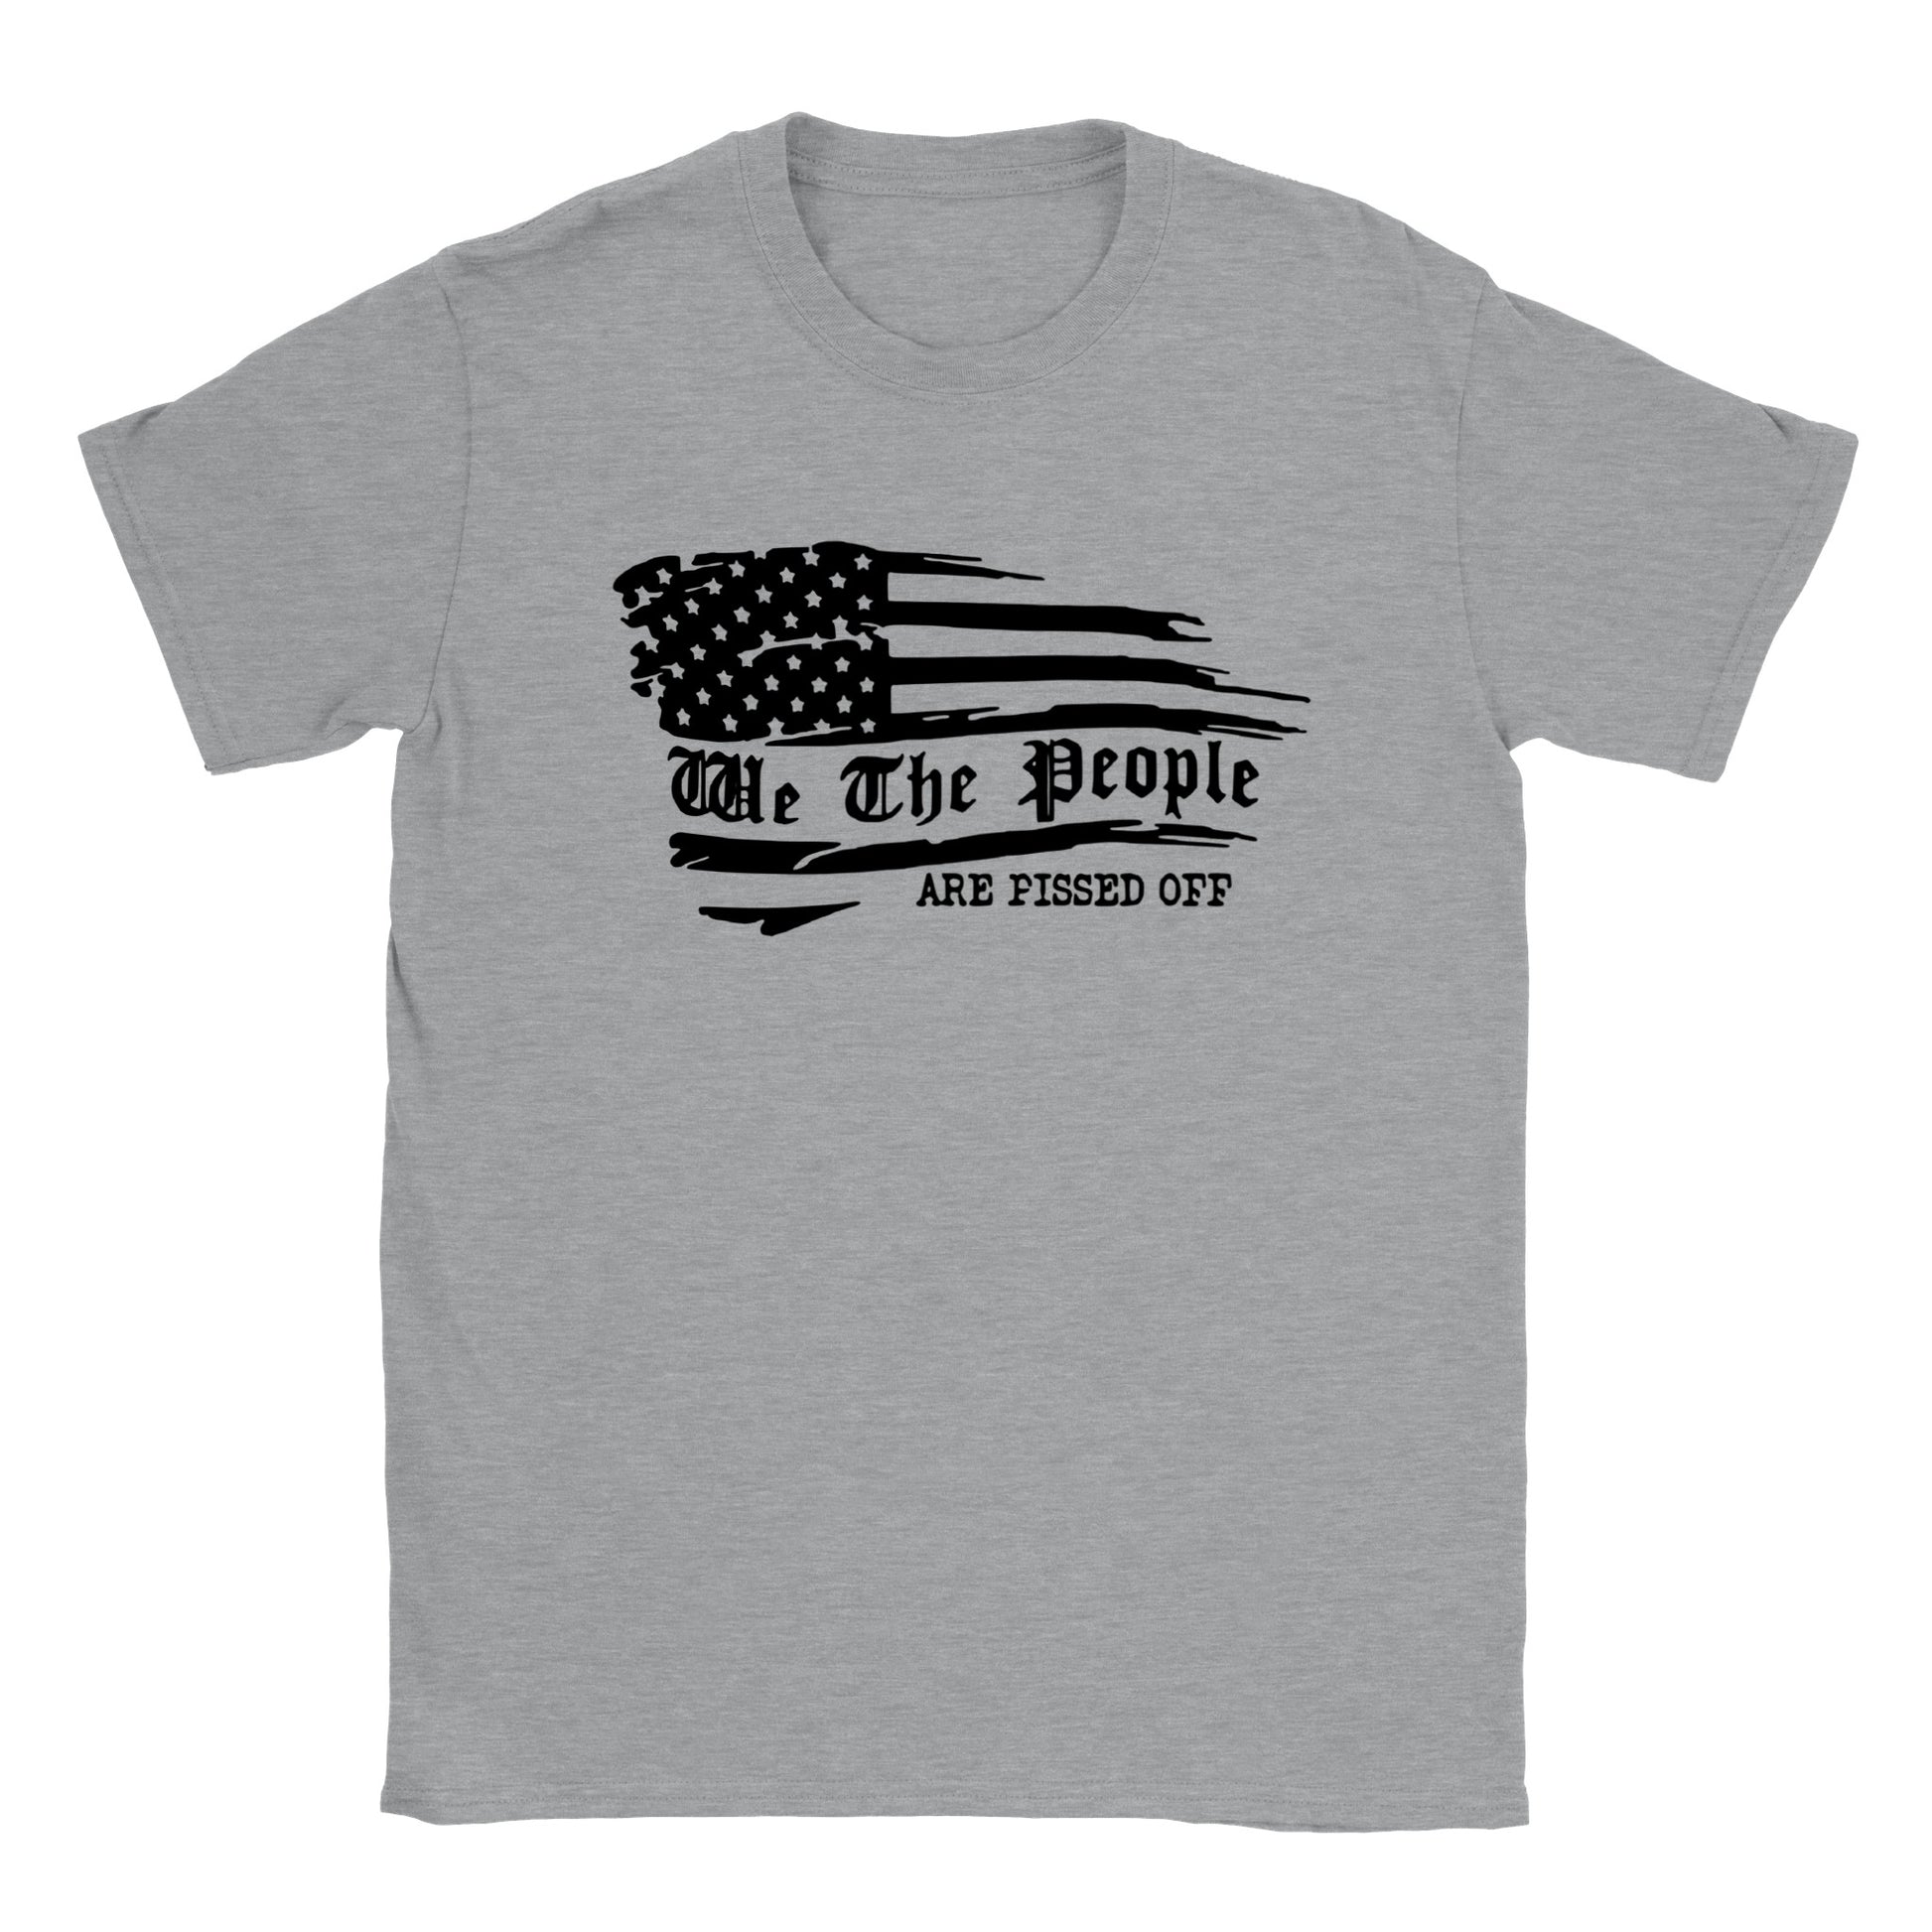 We The People... Are Pissed Off - Classic Unisex Crewneck T-shirt - Mister Snarky's